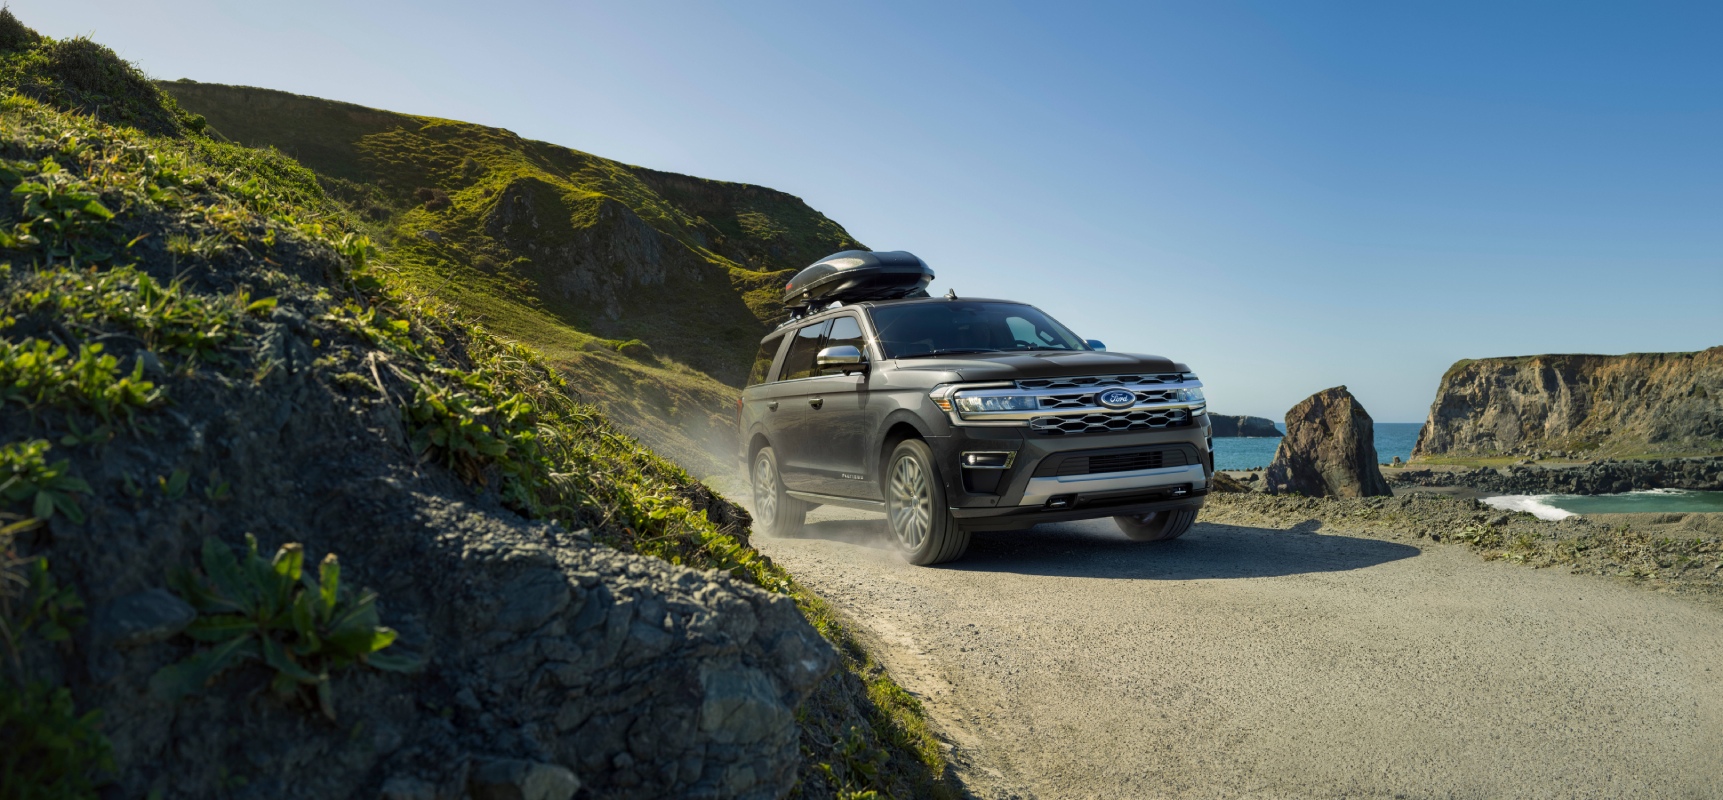 The most expensive SUVs to fill up with gas in August 2022 include this Ford Expedition